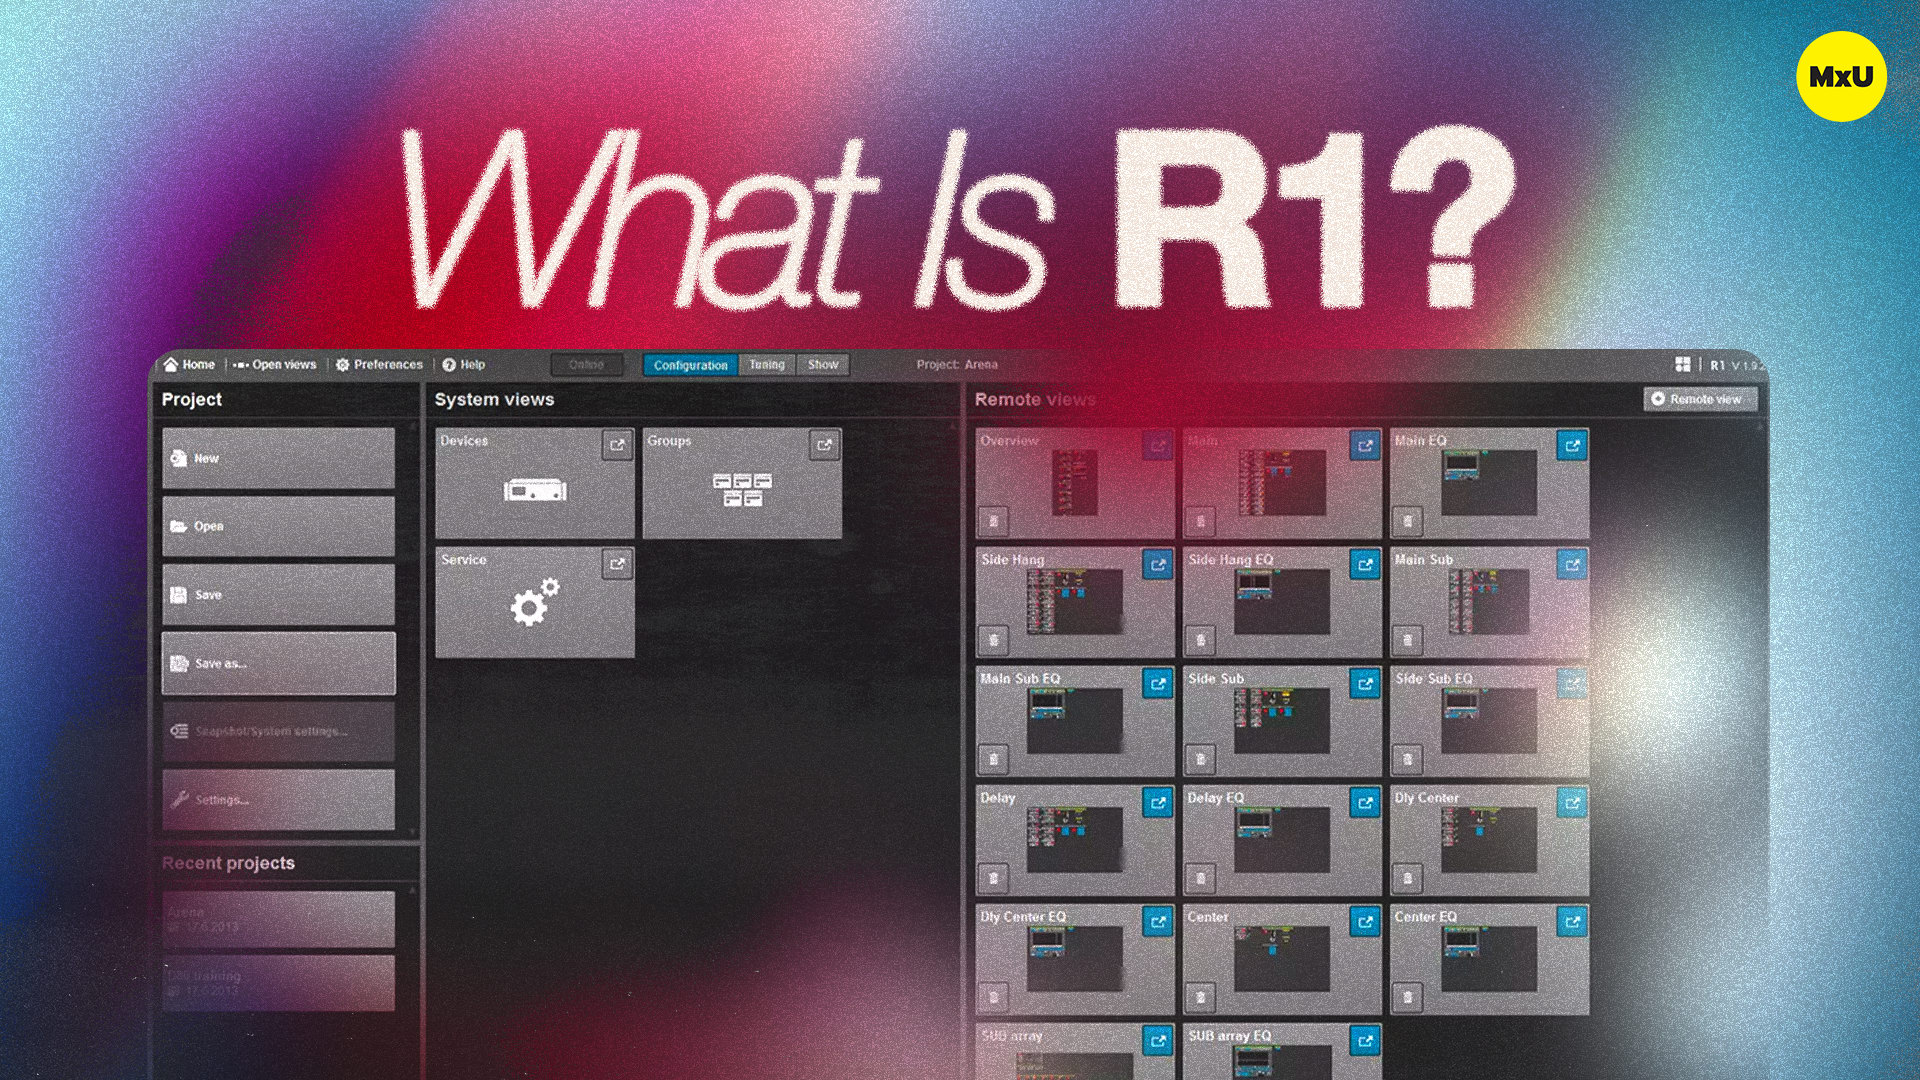 What is R1?